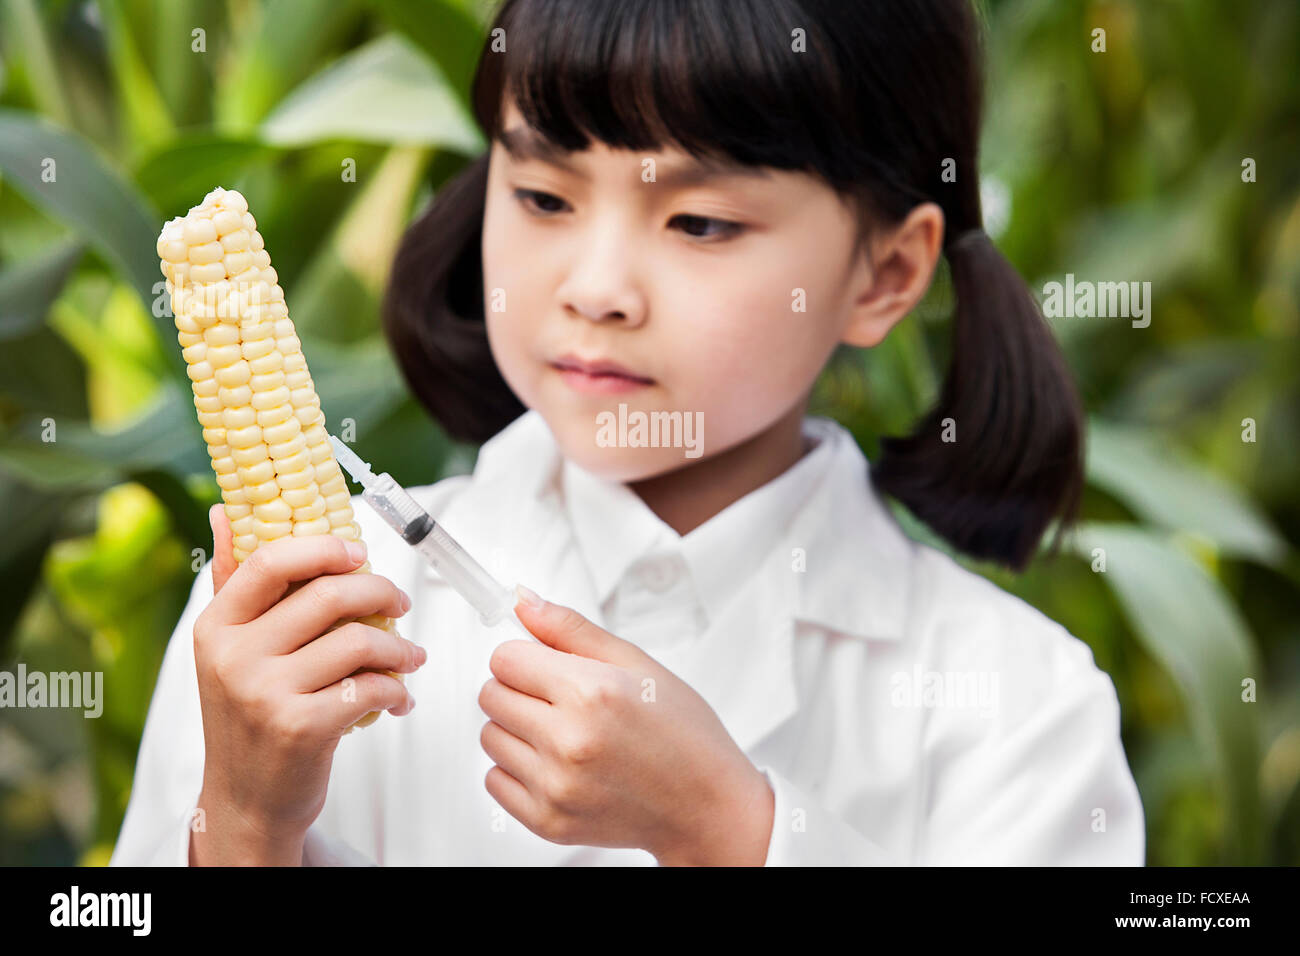 Girl in white gown holding a corn and a syringe and observing it seriously Stock Photo